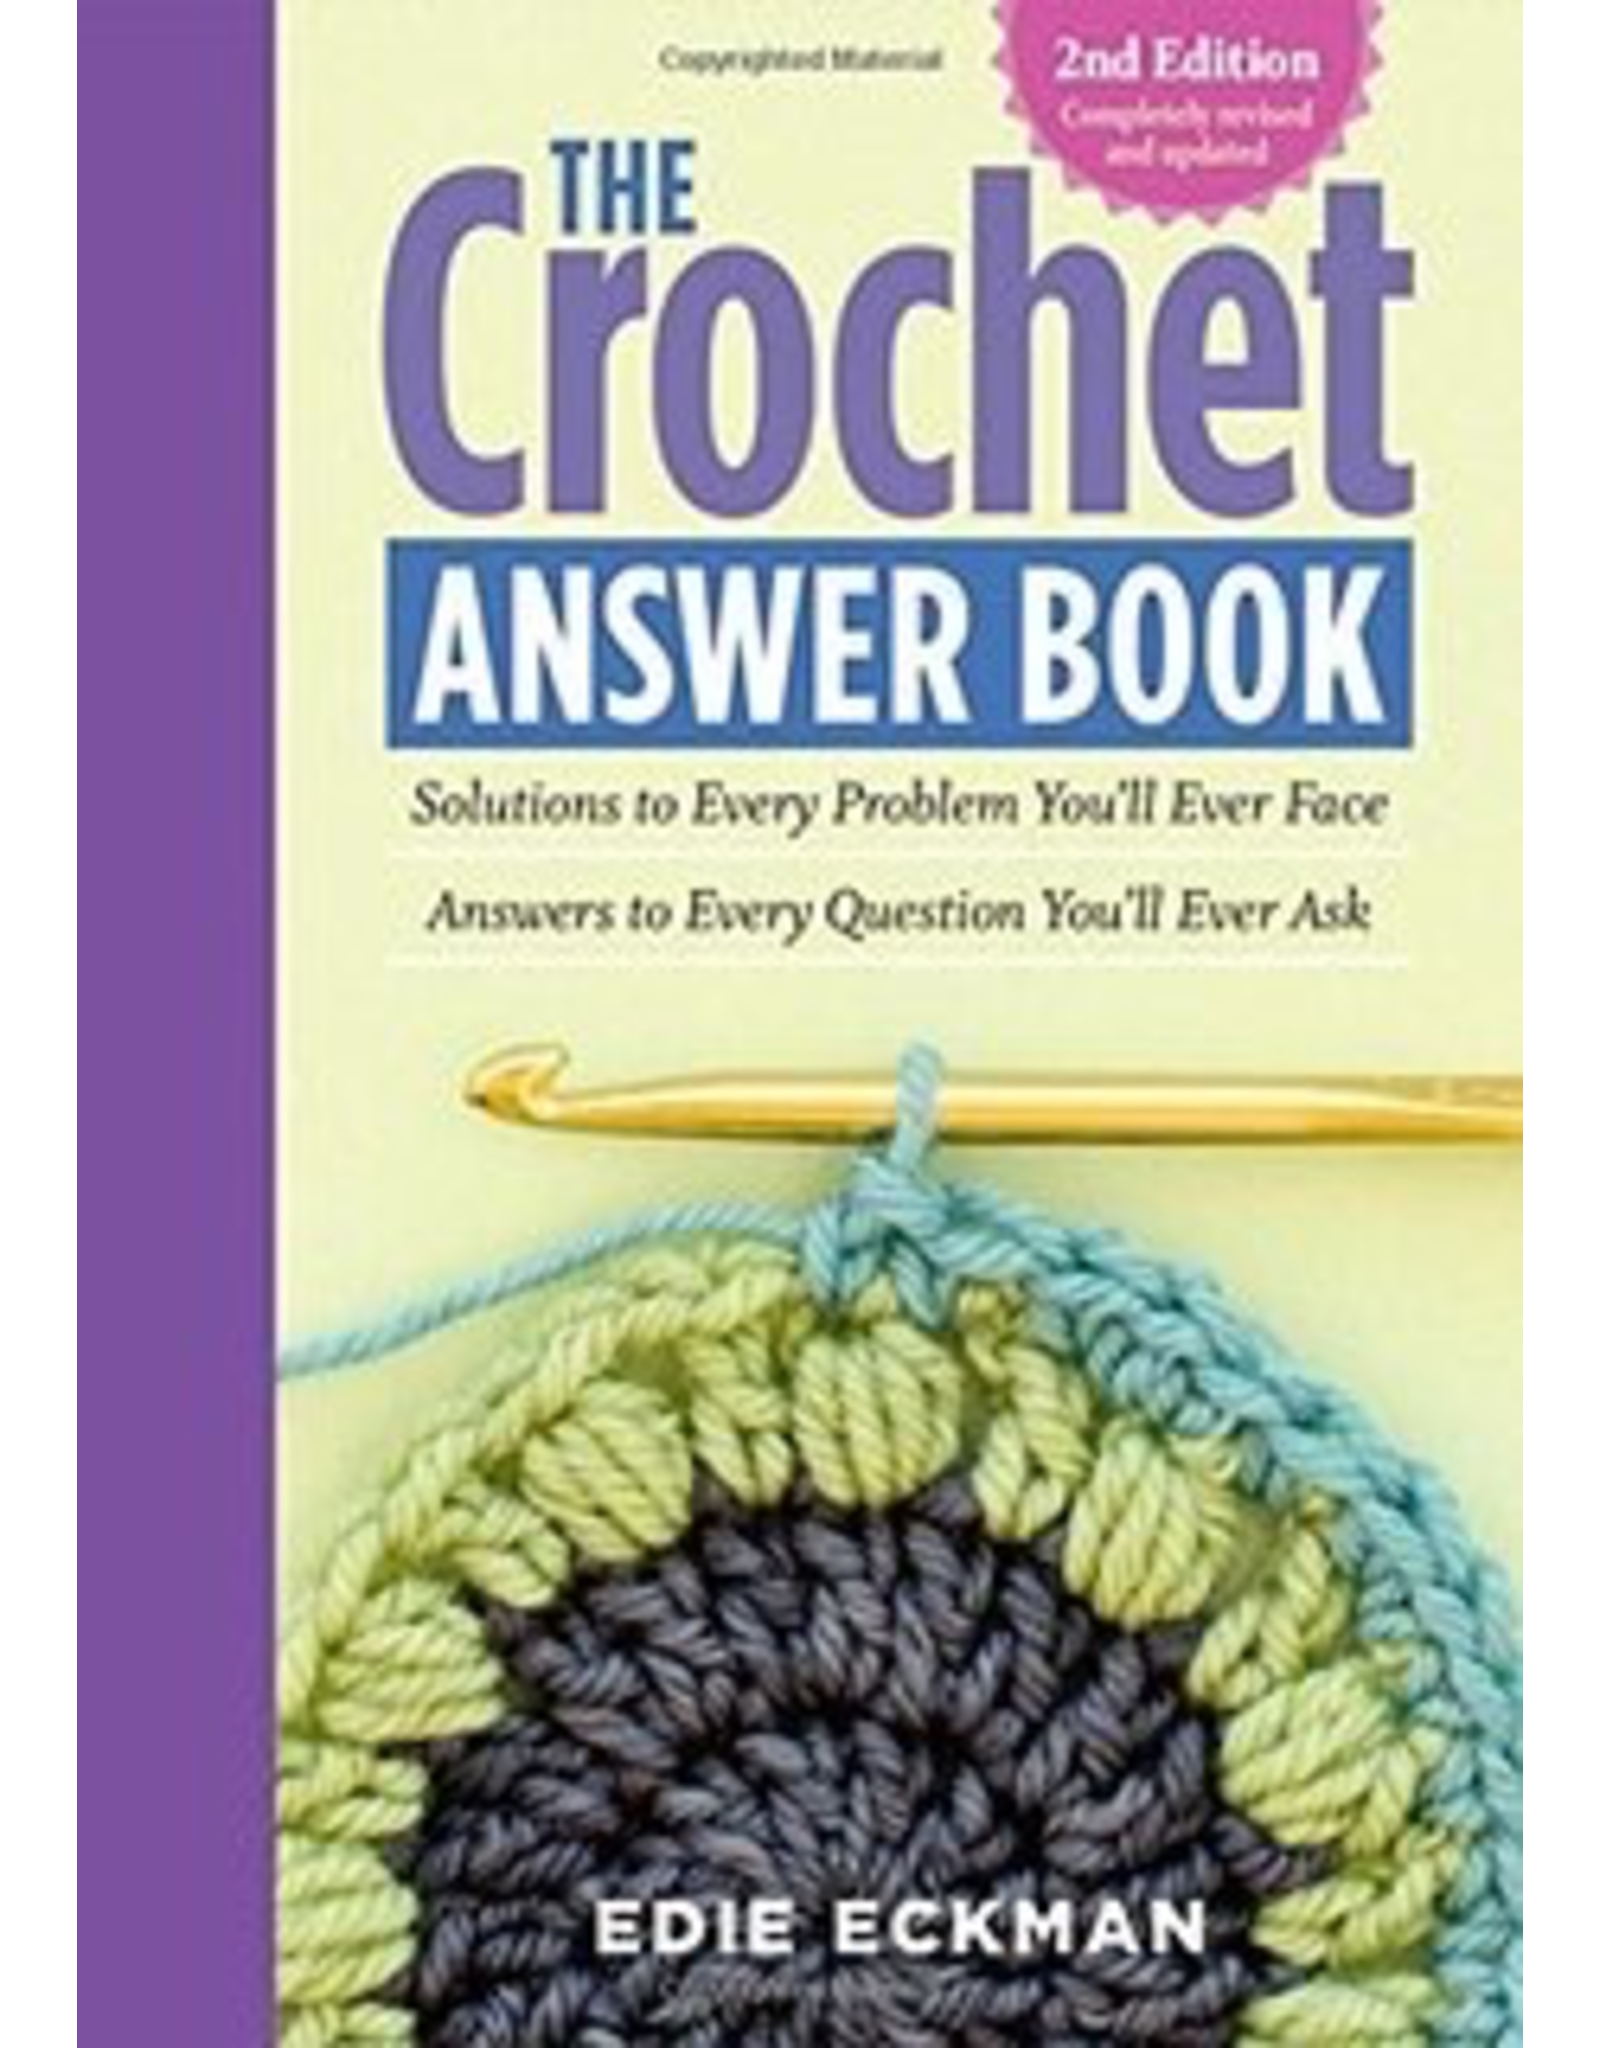 The Crochet Answer Book: 2nd Edition